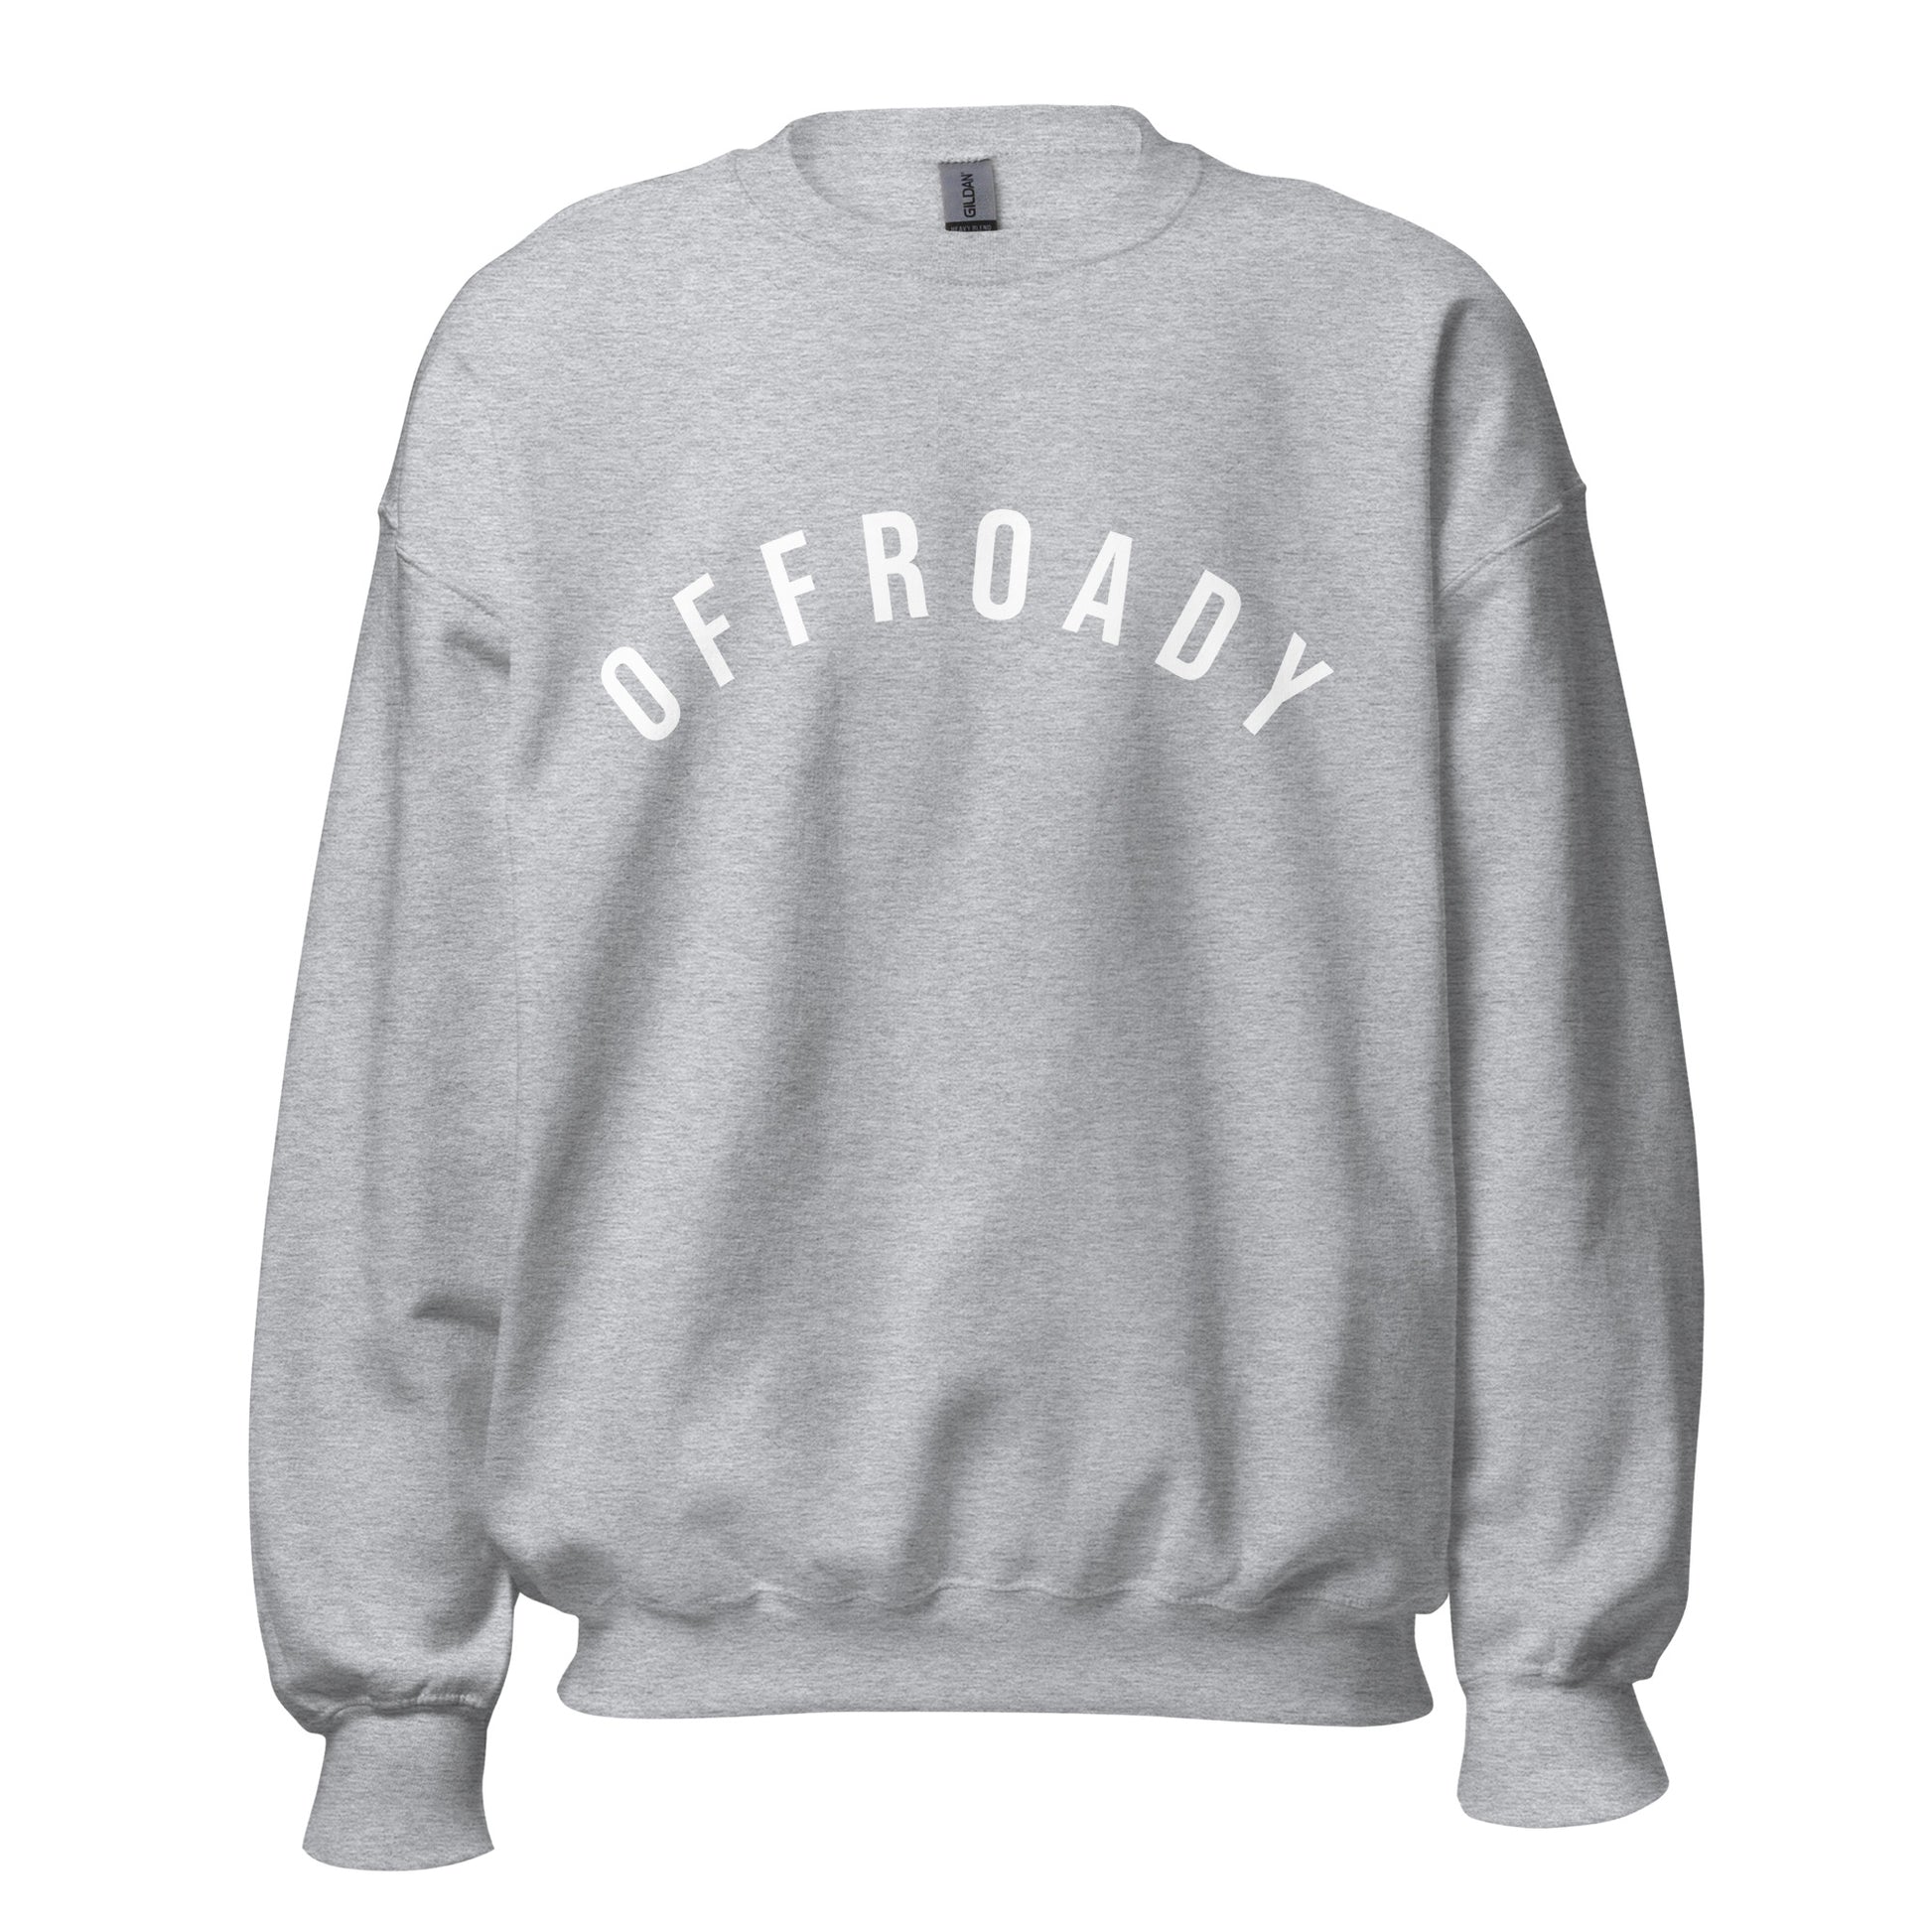 grey sweatshirt with the word outdoorsy in a white, capitalised font across the chest